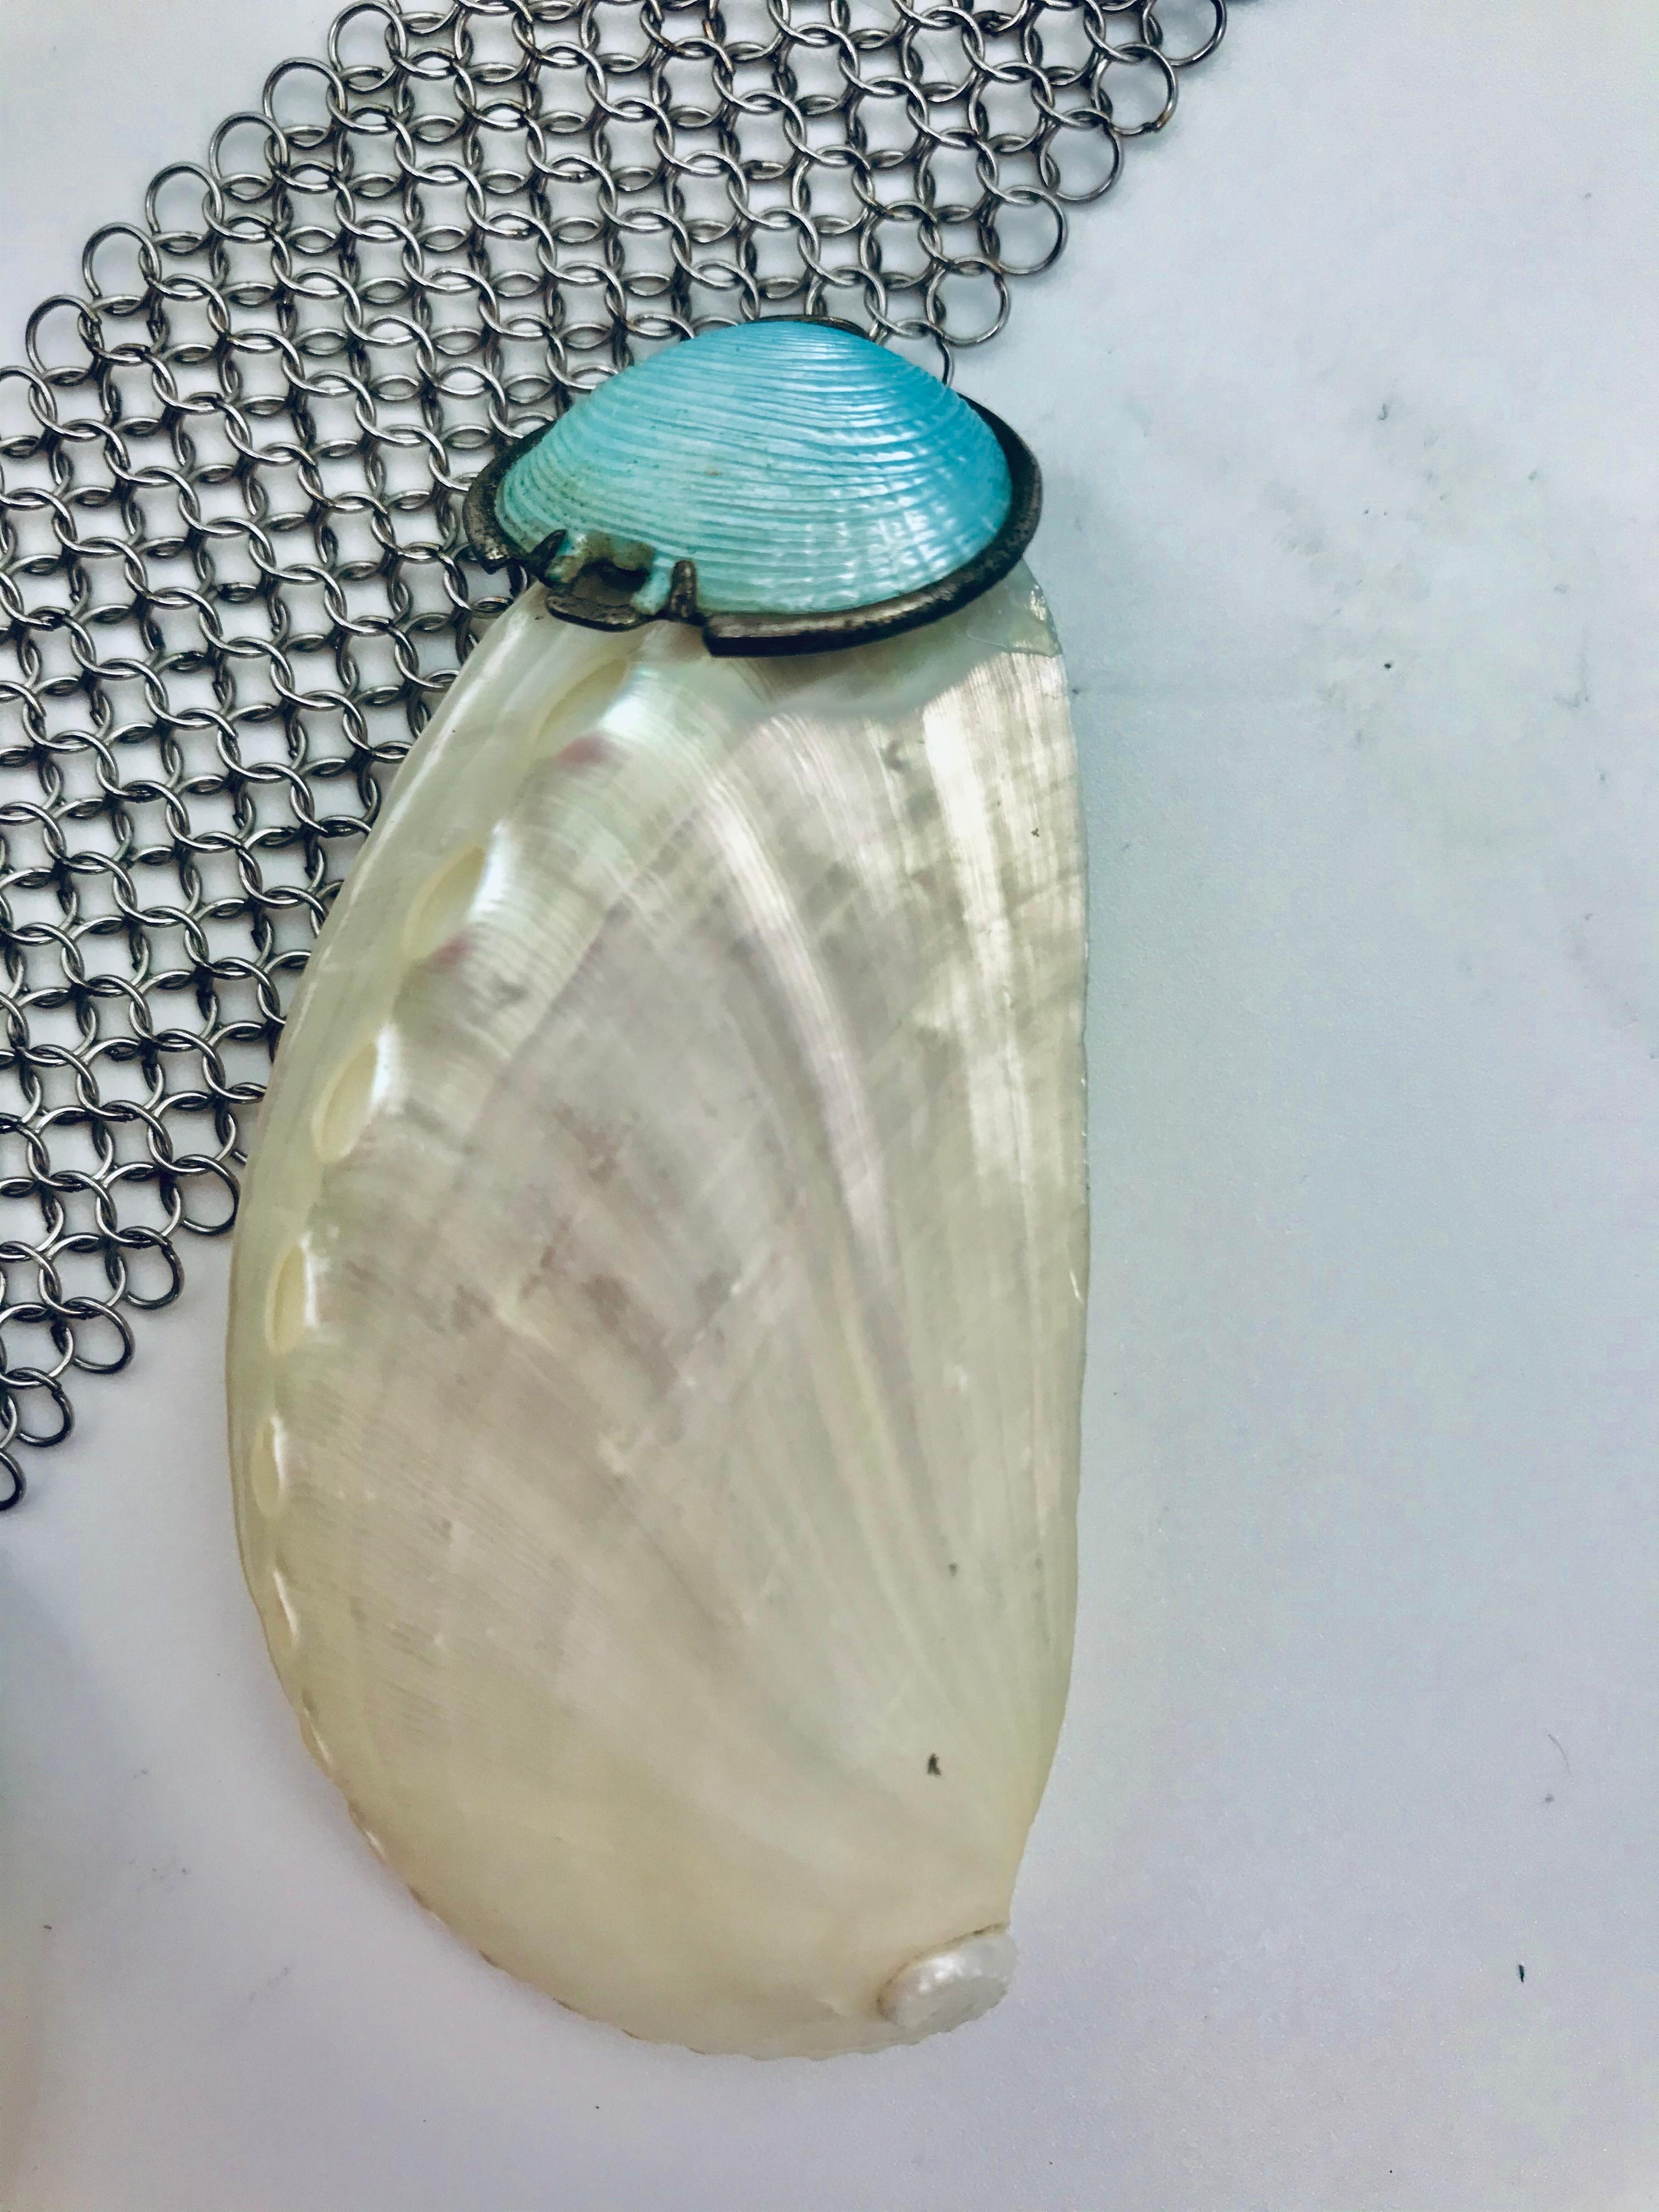 Women's Art Deco Shell Necklace , up-cycled with Stainless Steel Mesh , by Sylvia Gottwald For Sale